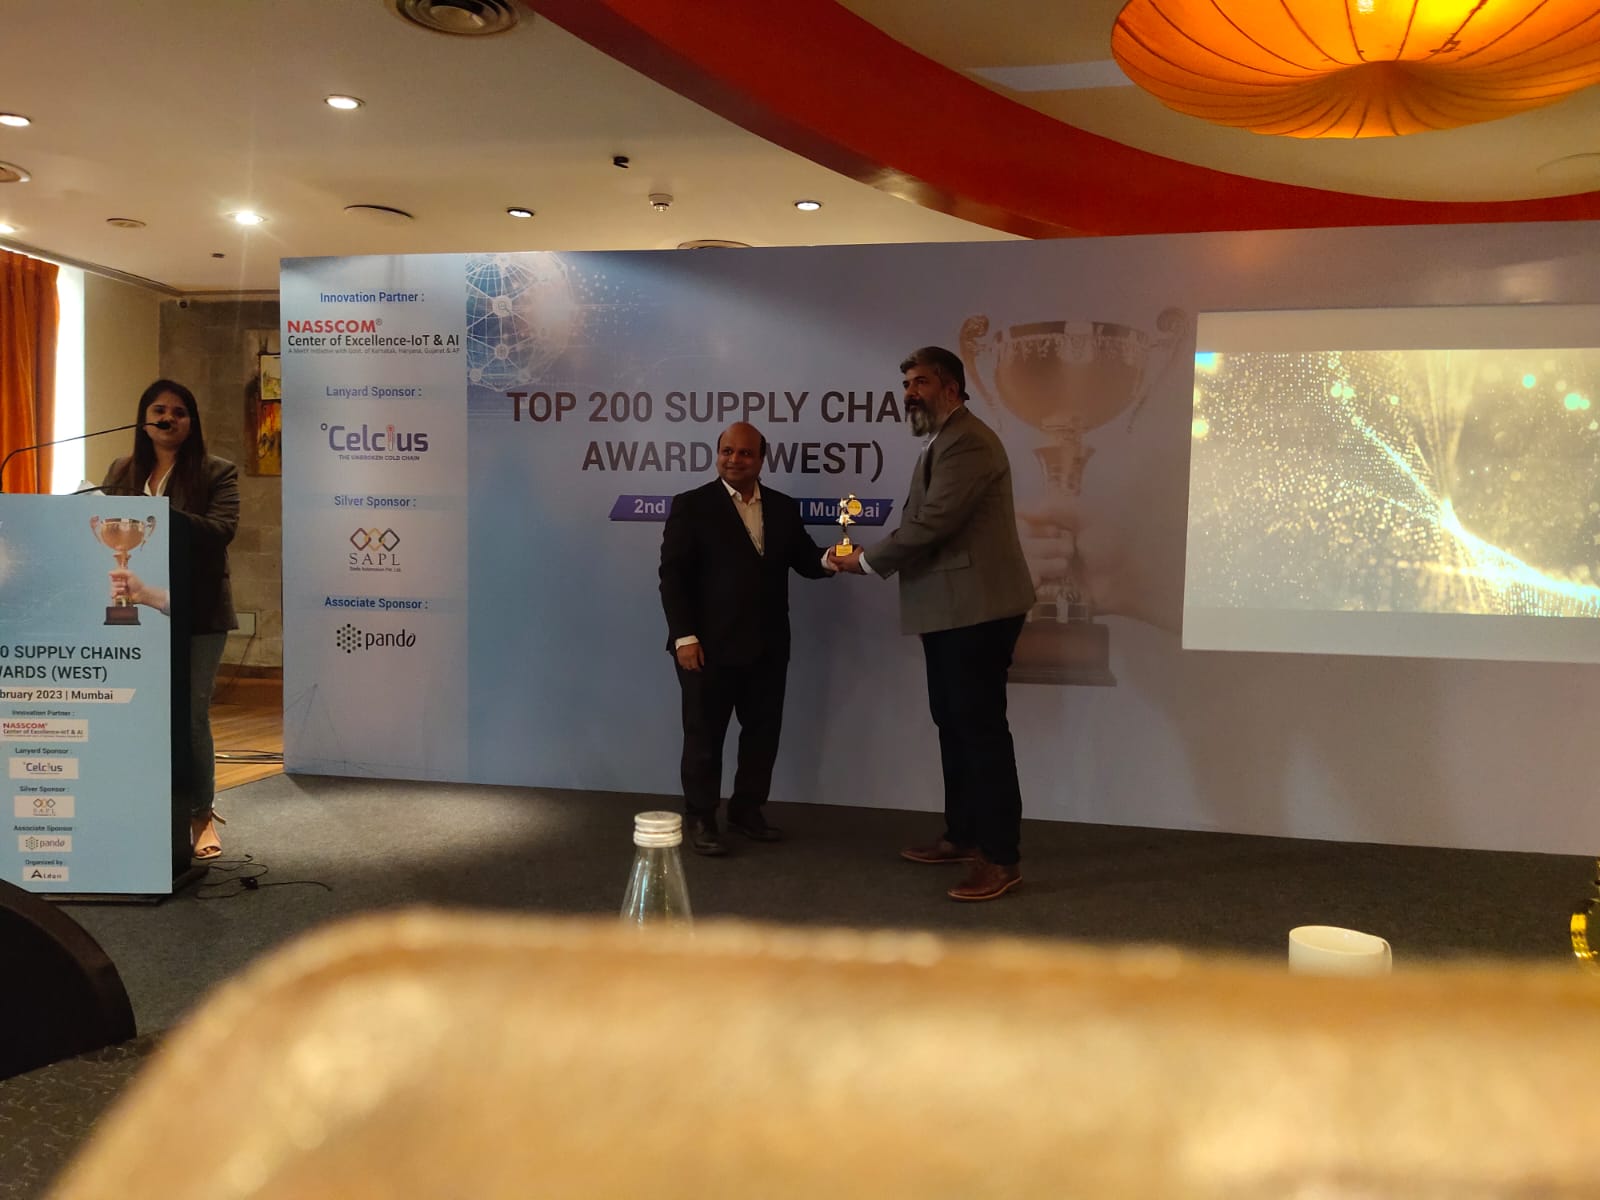 Top 200 Supply Chain Award for the Year